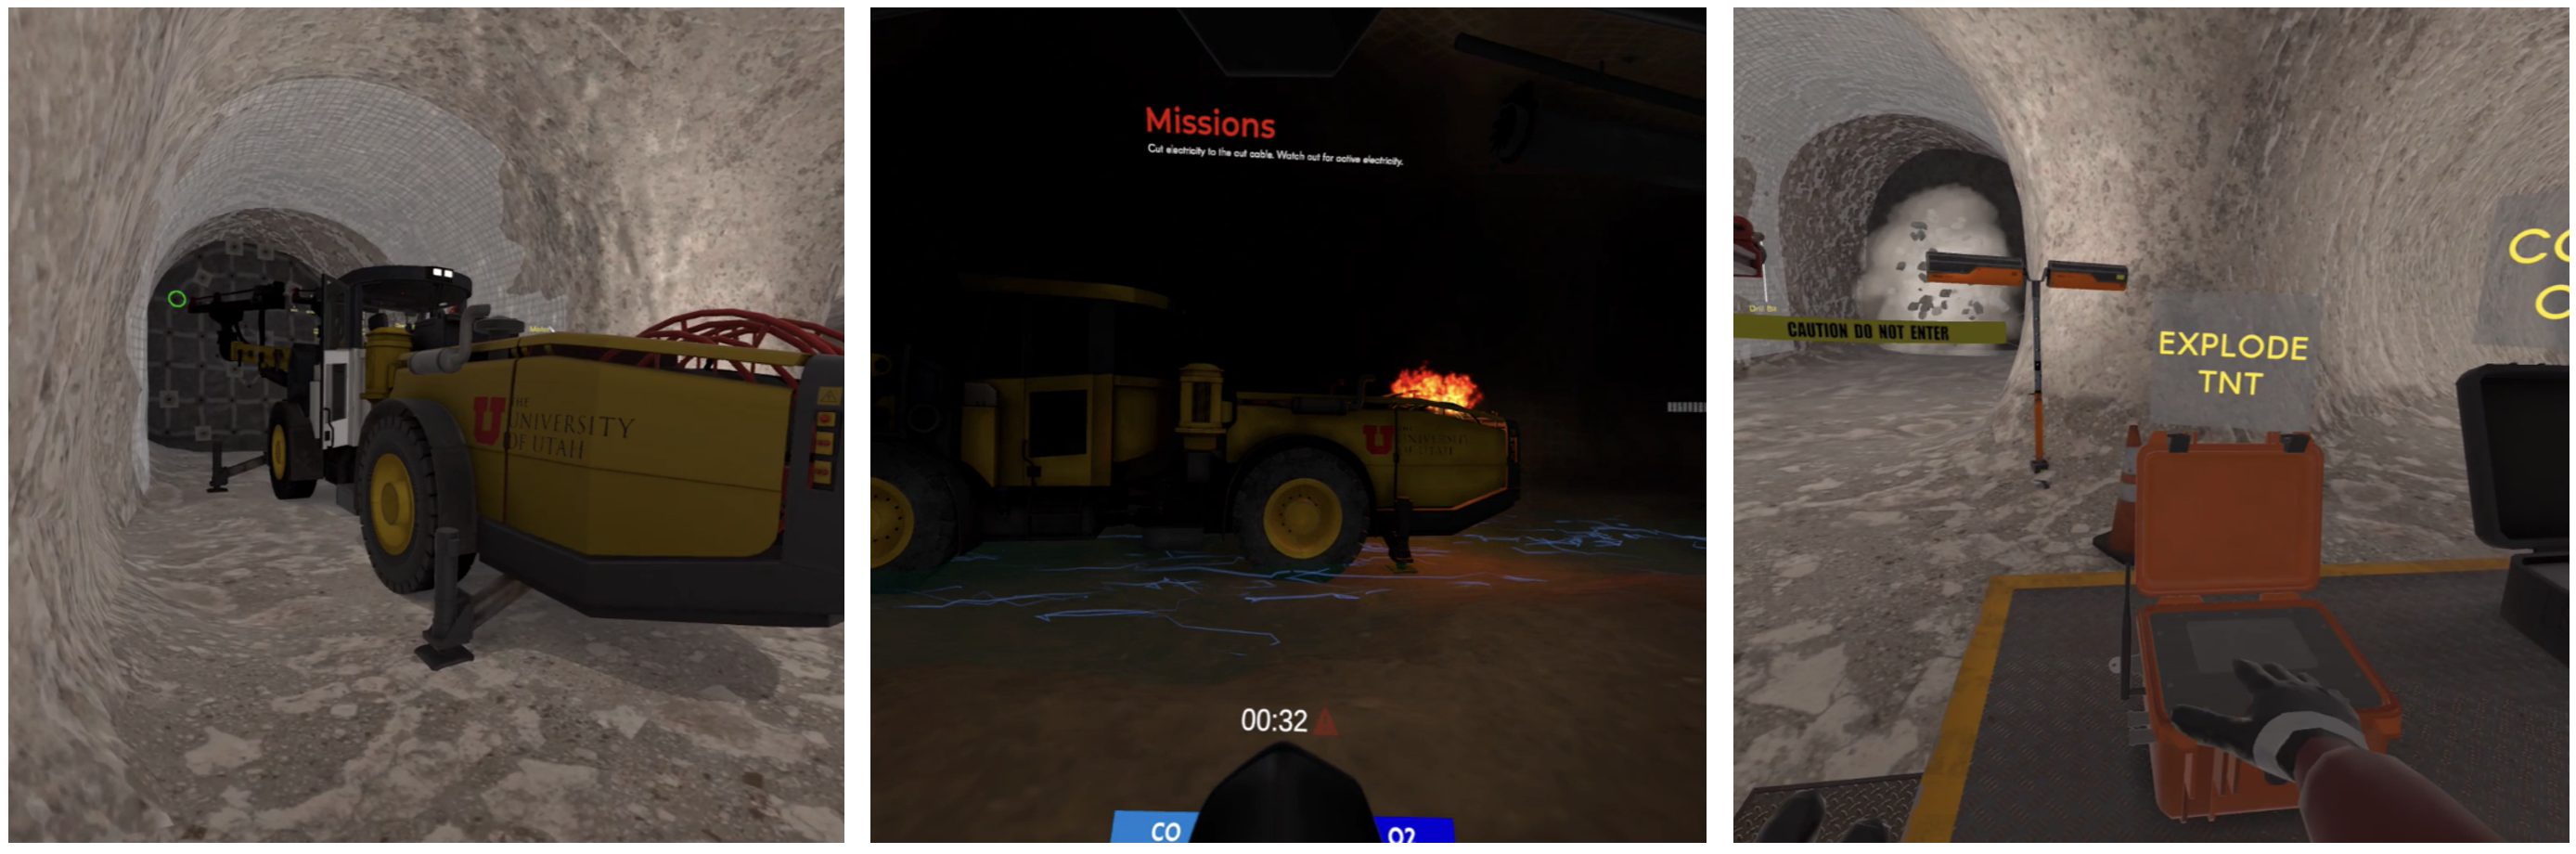 Panel of three video-game-like graphics of mining equipment in tunnels. In the center panel, the surroundings are dark and the equipment is on fire.